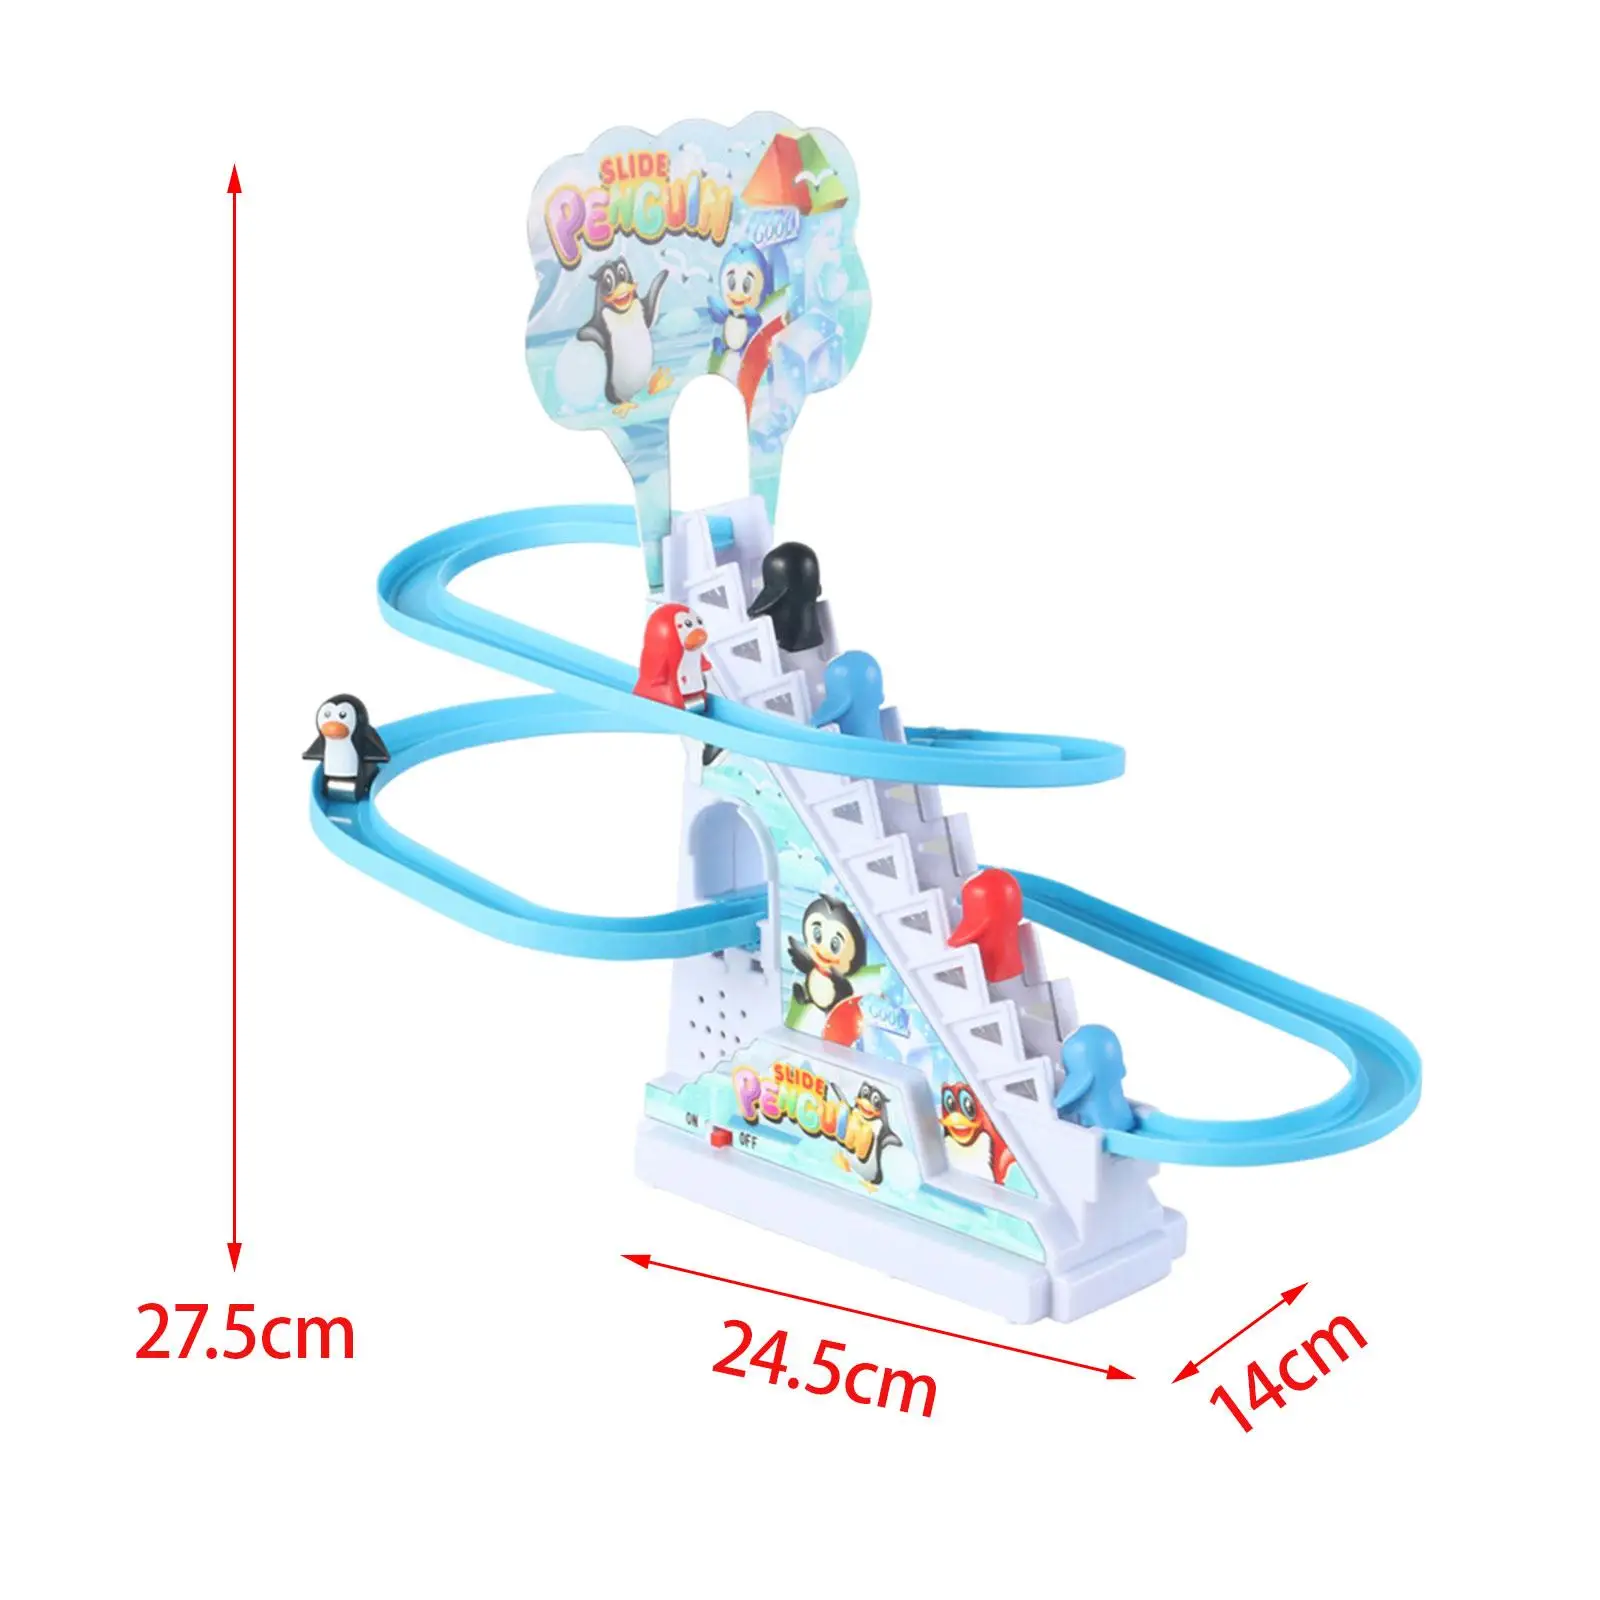 

Penguin Climbing Stairs Toys penguins slide Playset with Flashing Lights and Music Small Penguin Toy stair for Kids Gifts